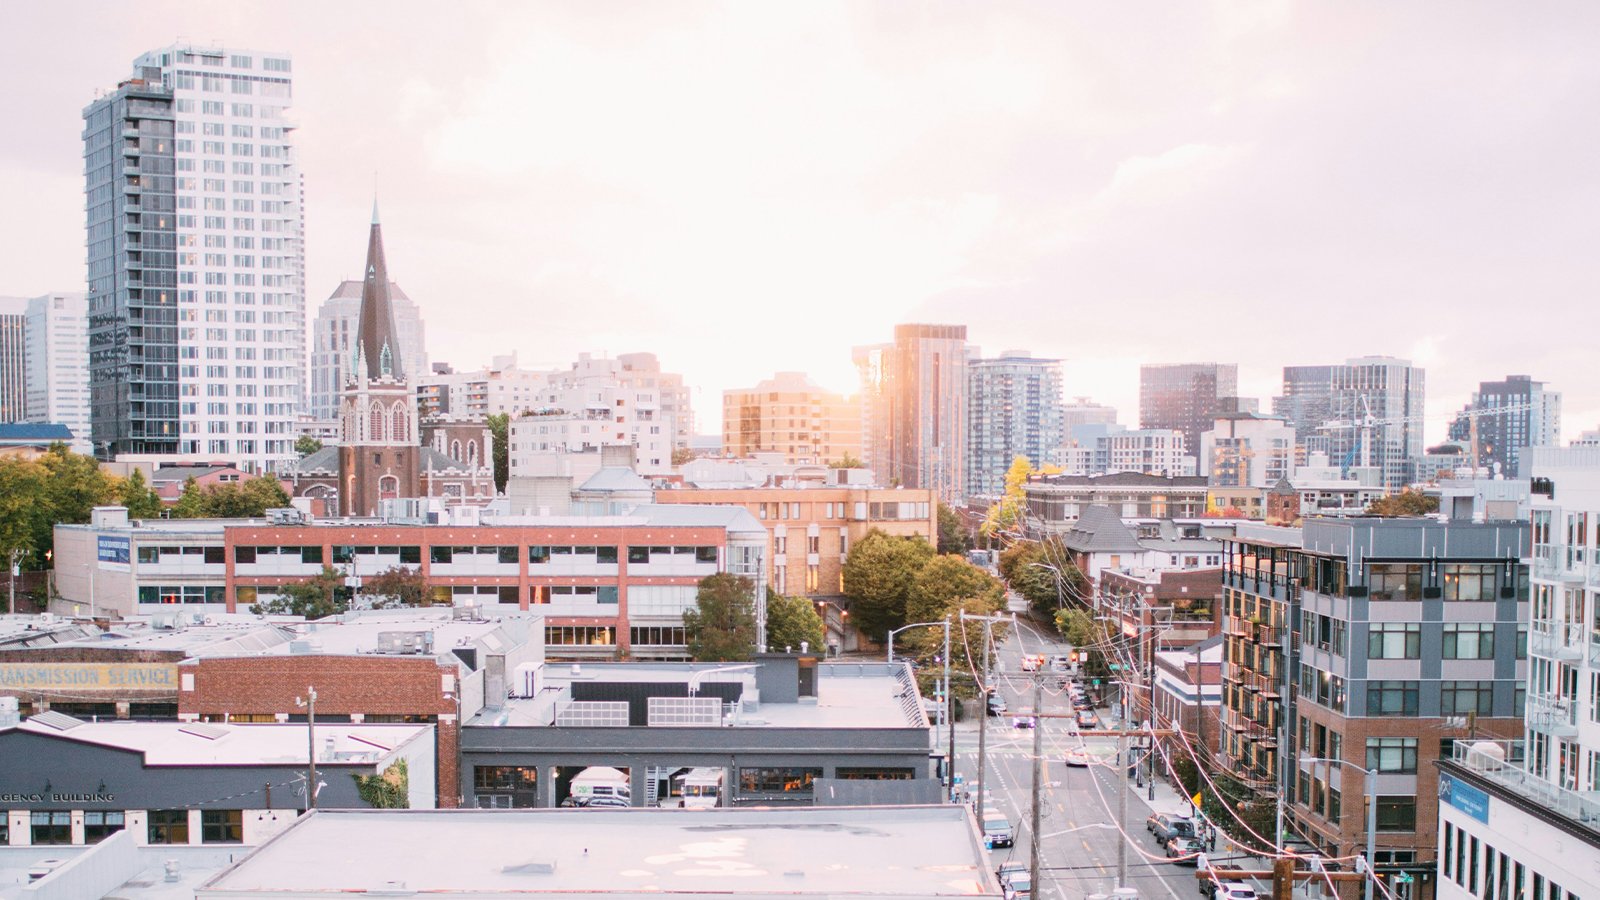 A rooftop view of the Capitol Hill neighborhood of Seattle.